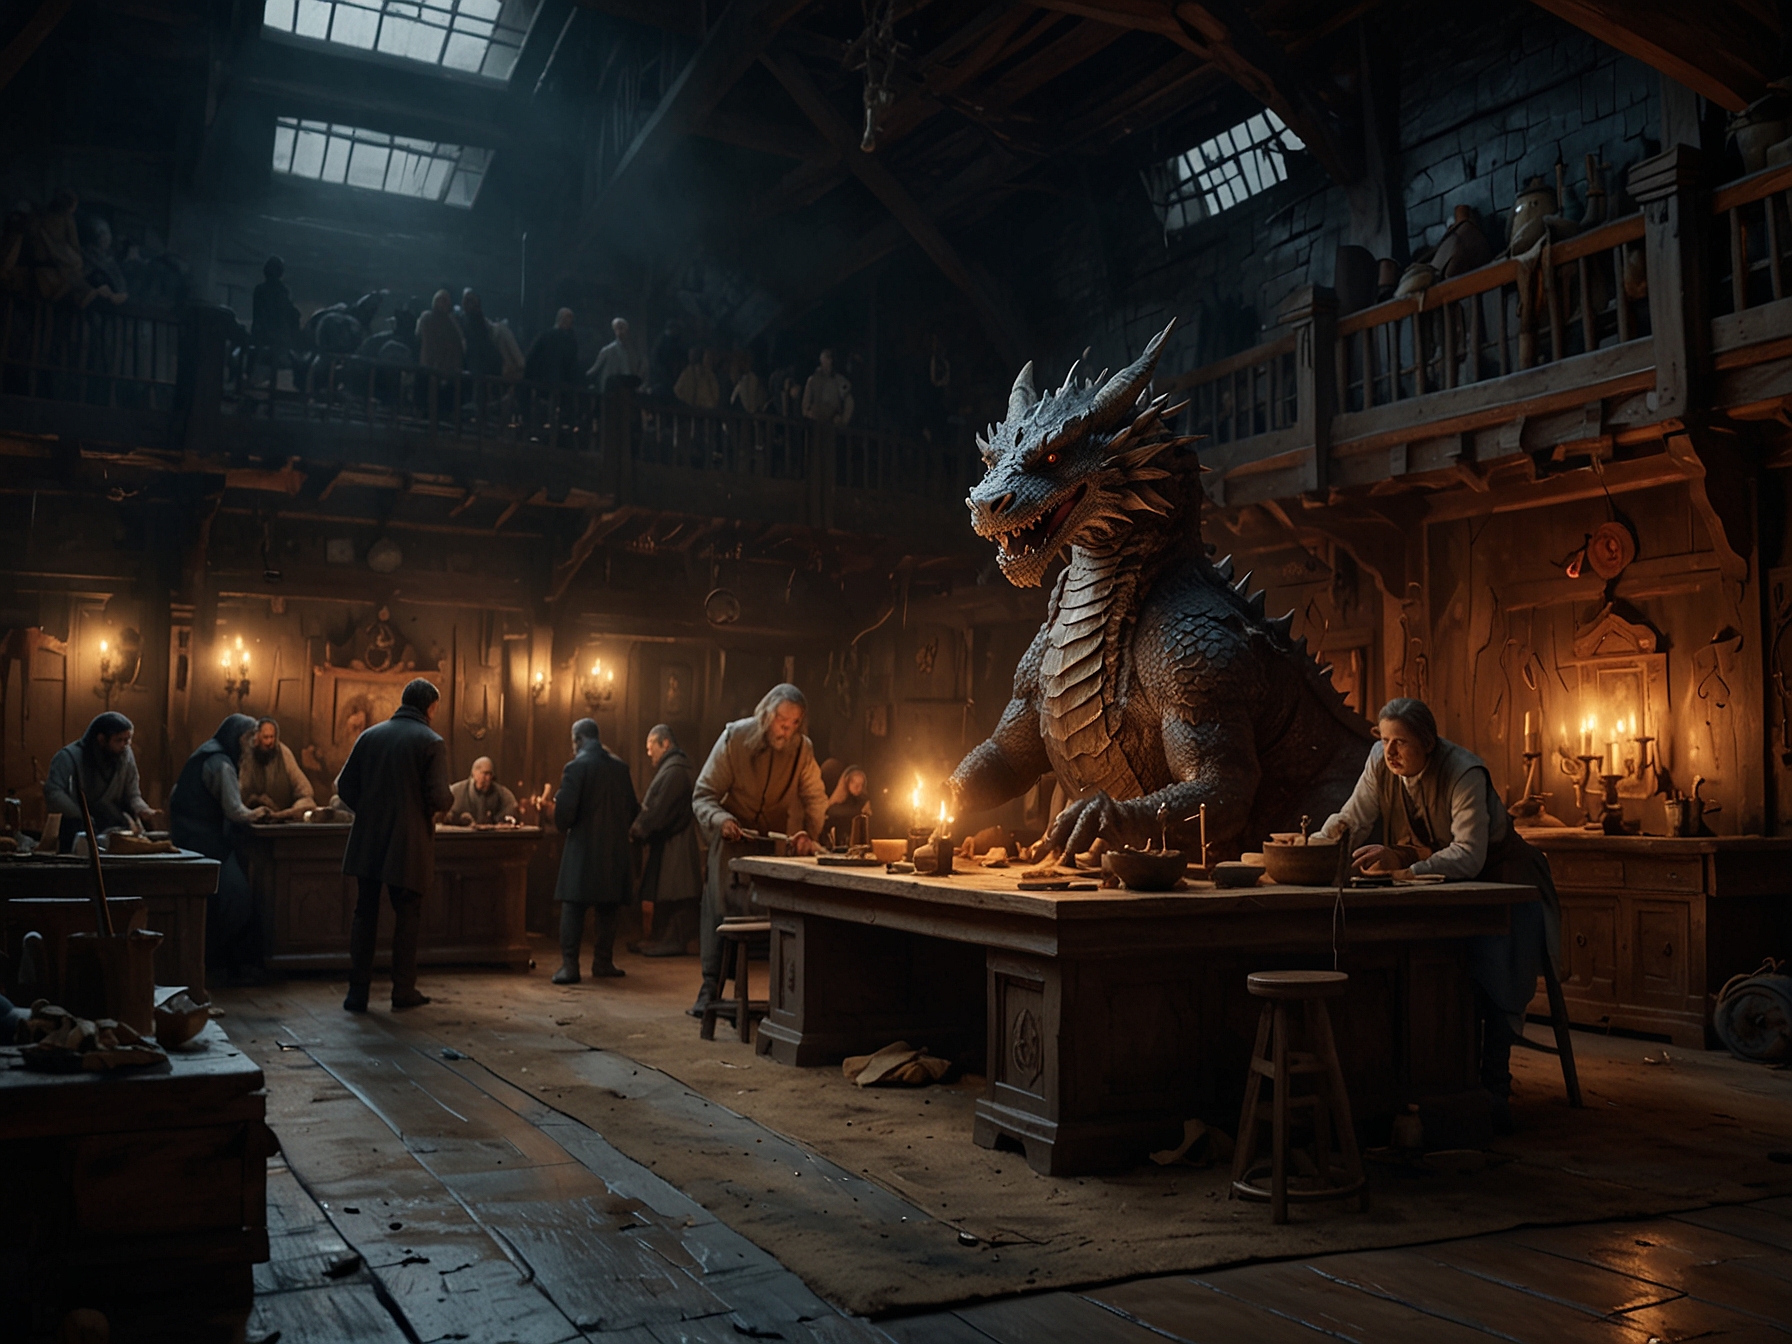 A behind-the-scenes look at the production of House of the Dragon, showcasing the elaborate set and crew at work.